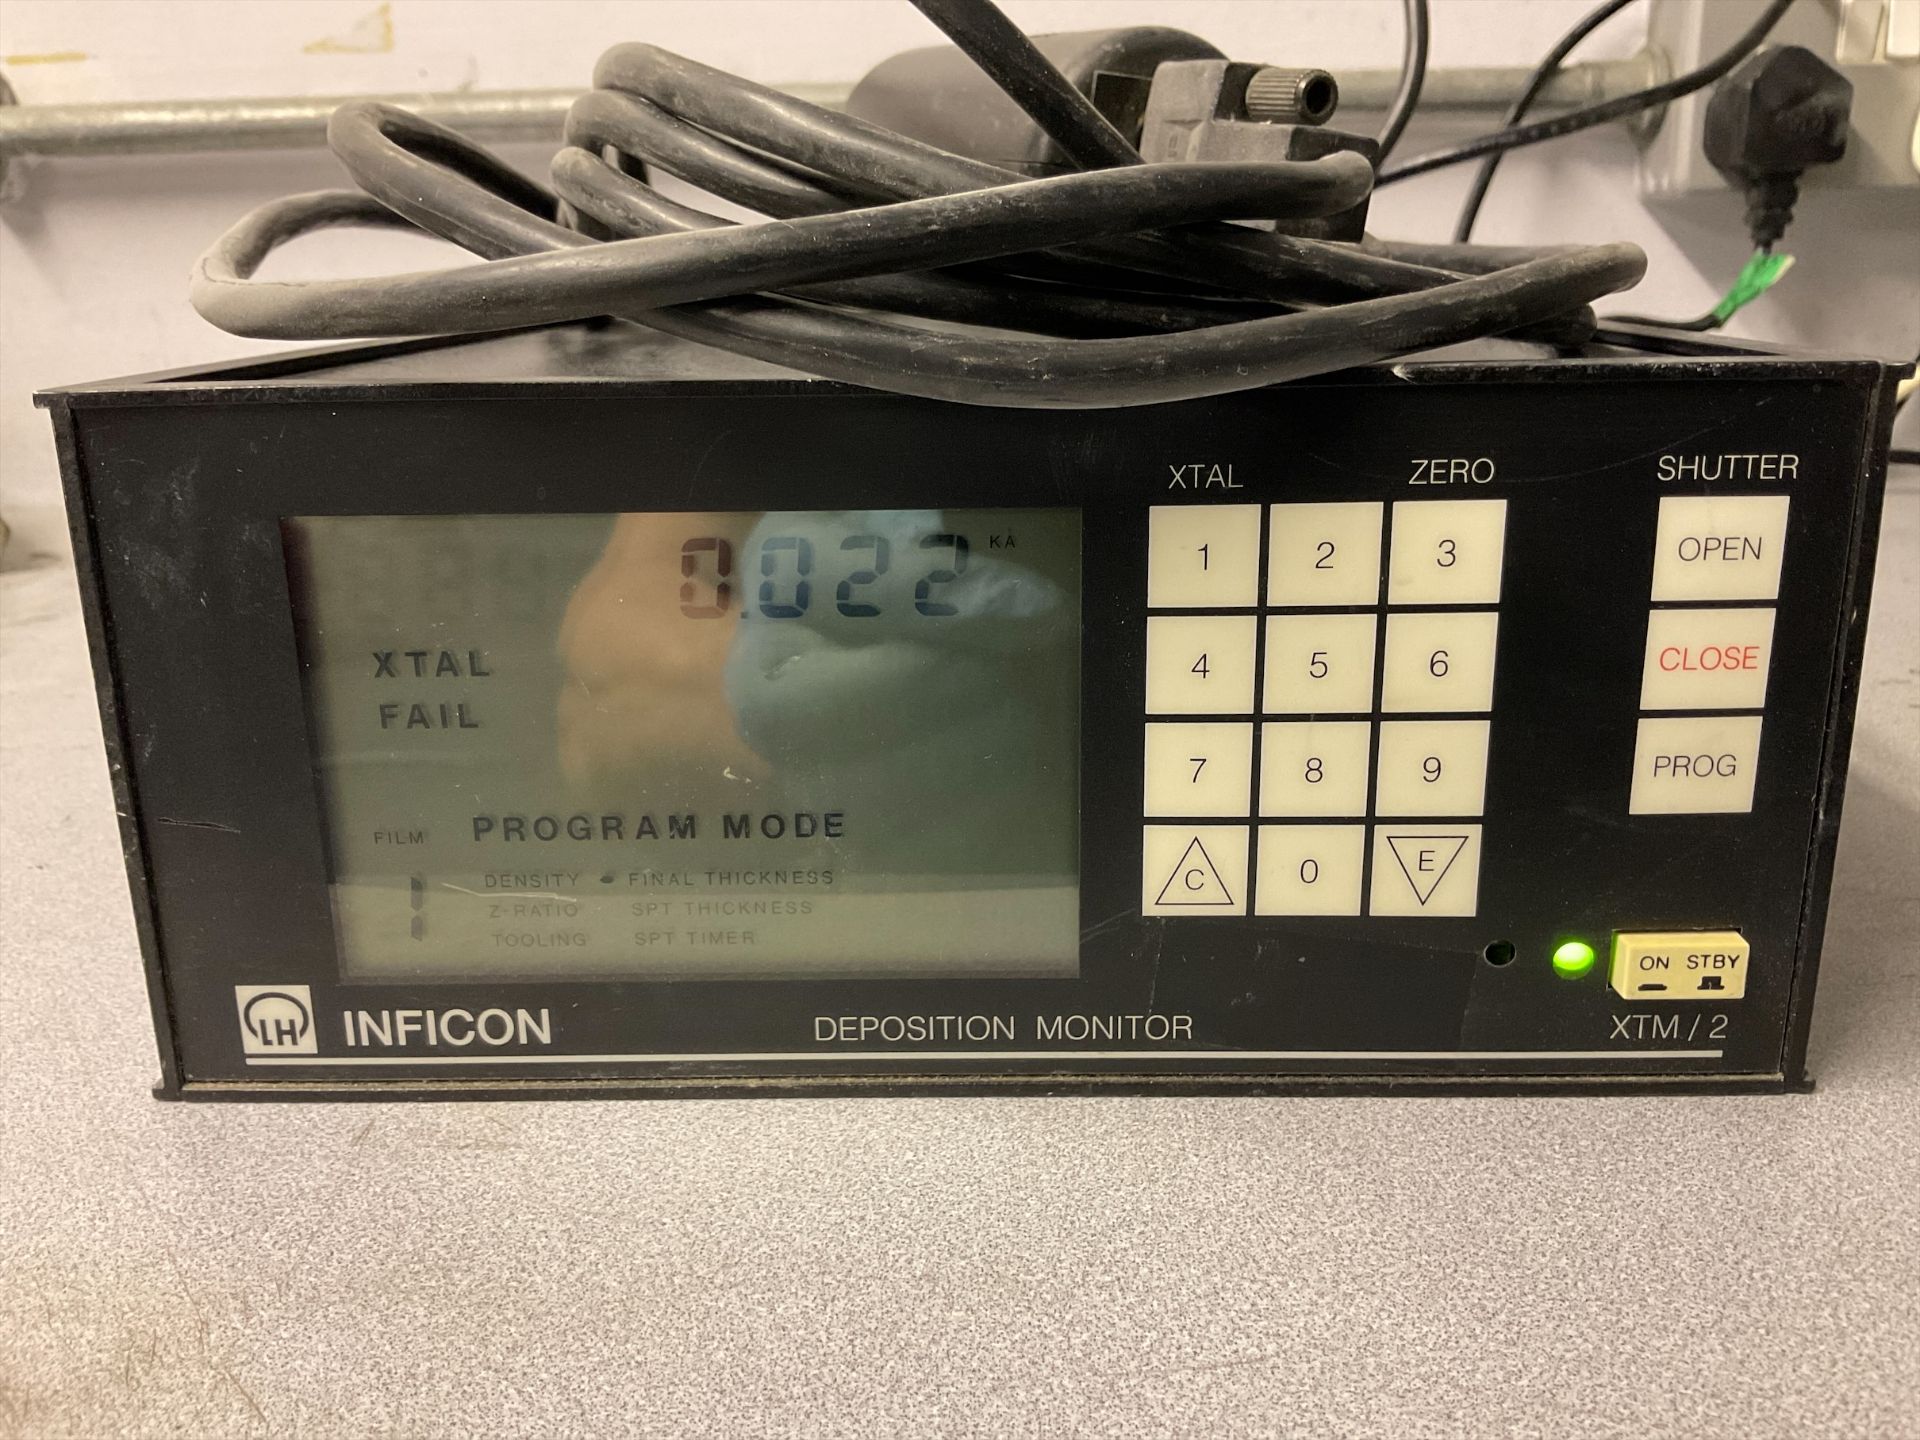 Inficon XTM 2 Deposition Monitor with Inline Oscillator